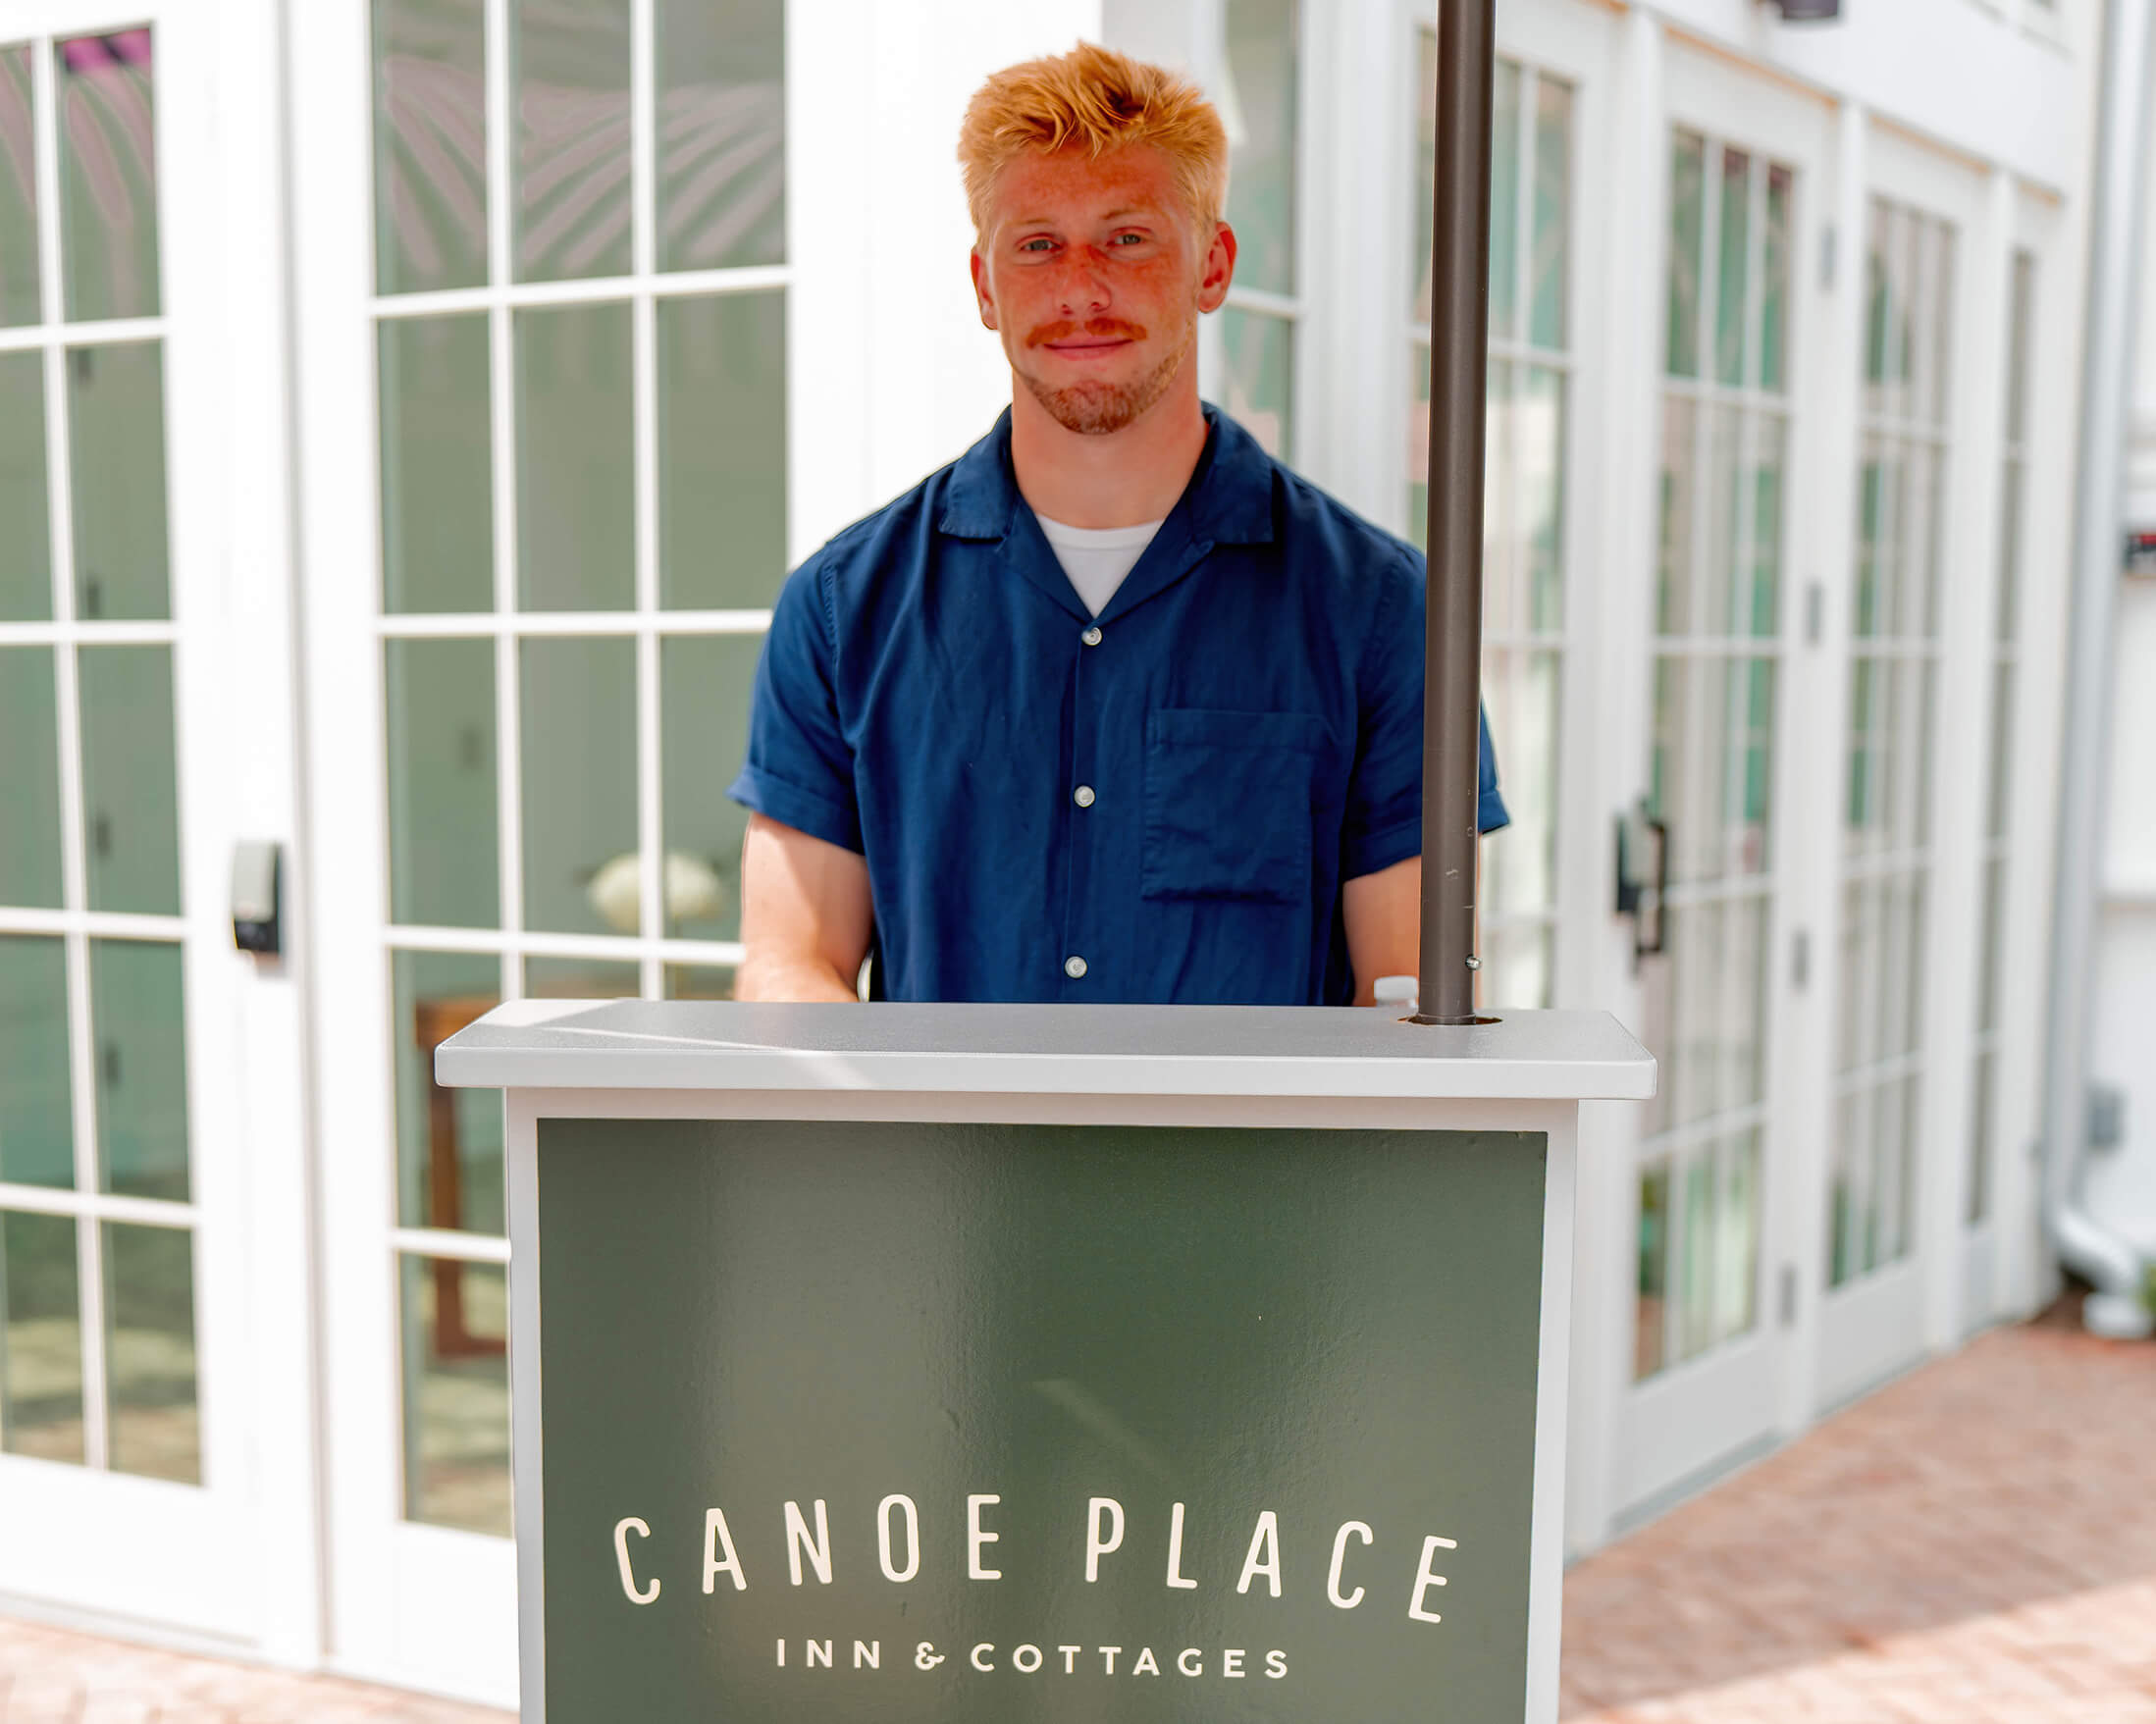 Gold Coast provides doorman and greeters for establishments such as Canoe Place in Hampton Bays, NY